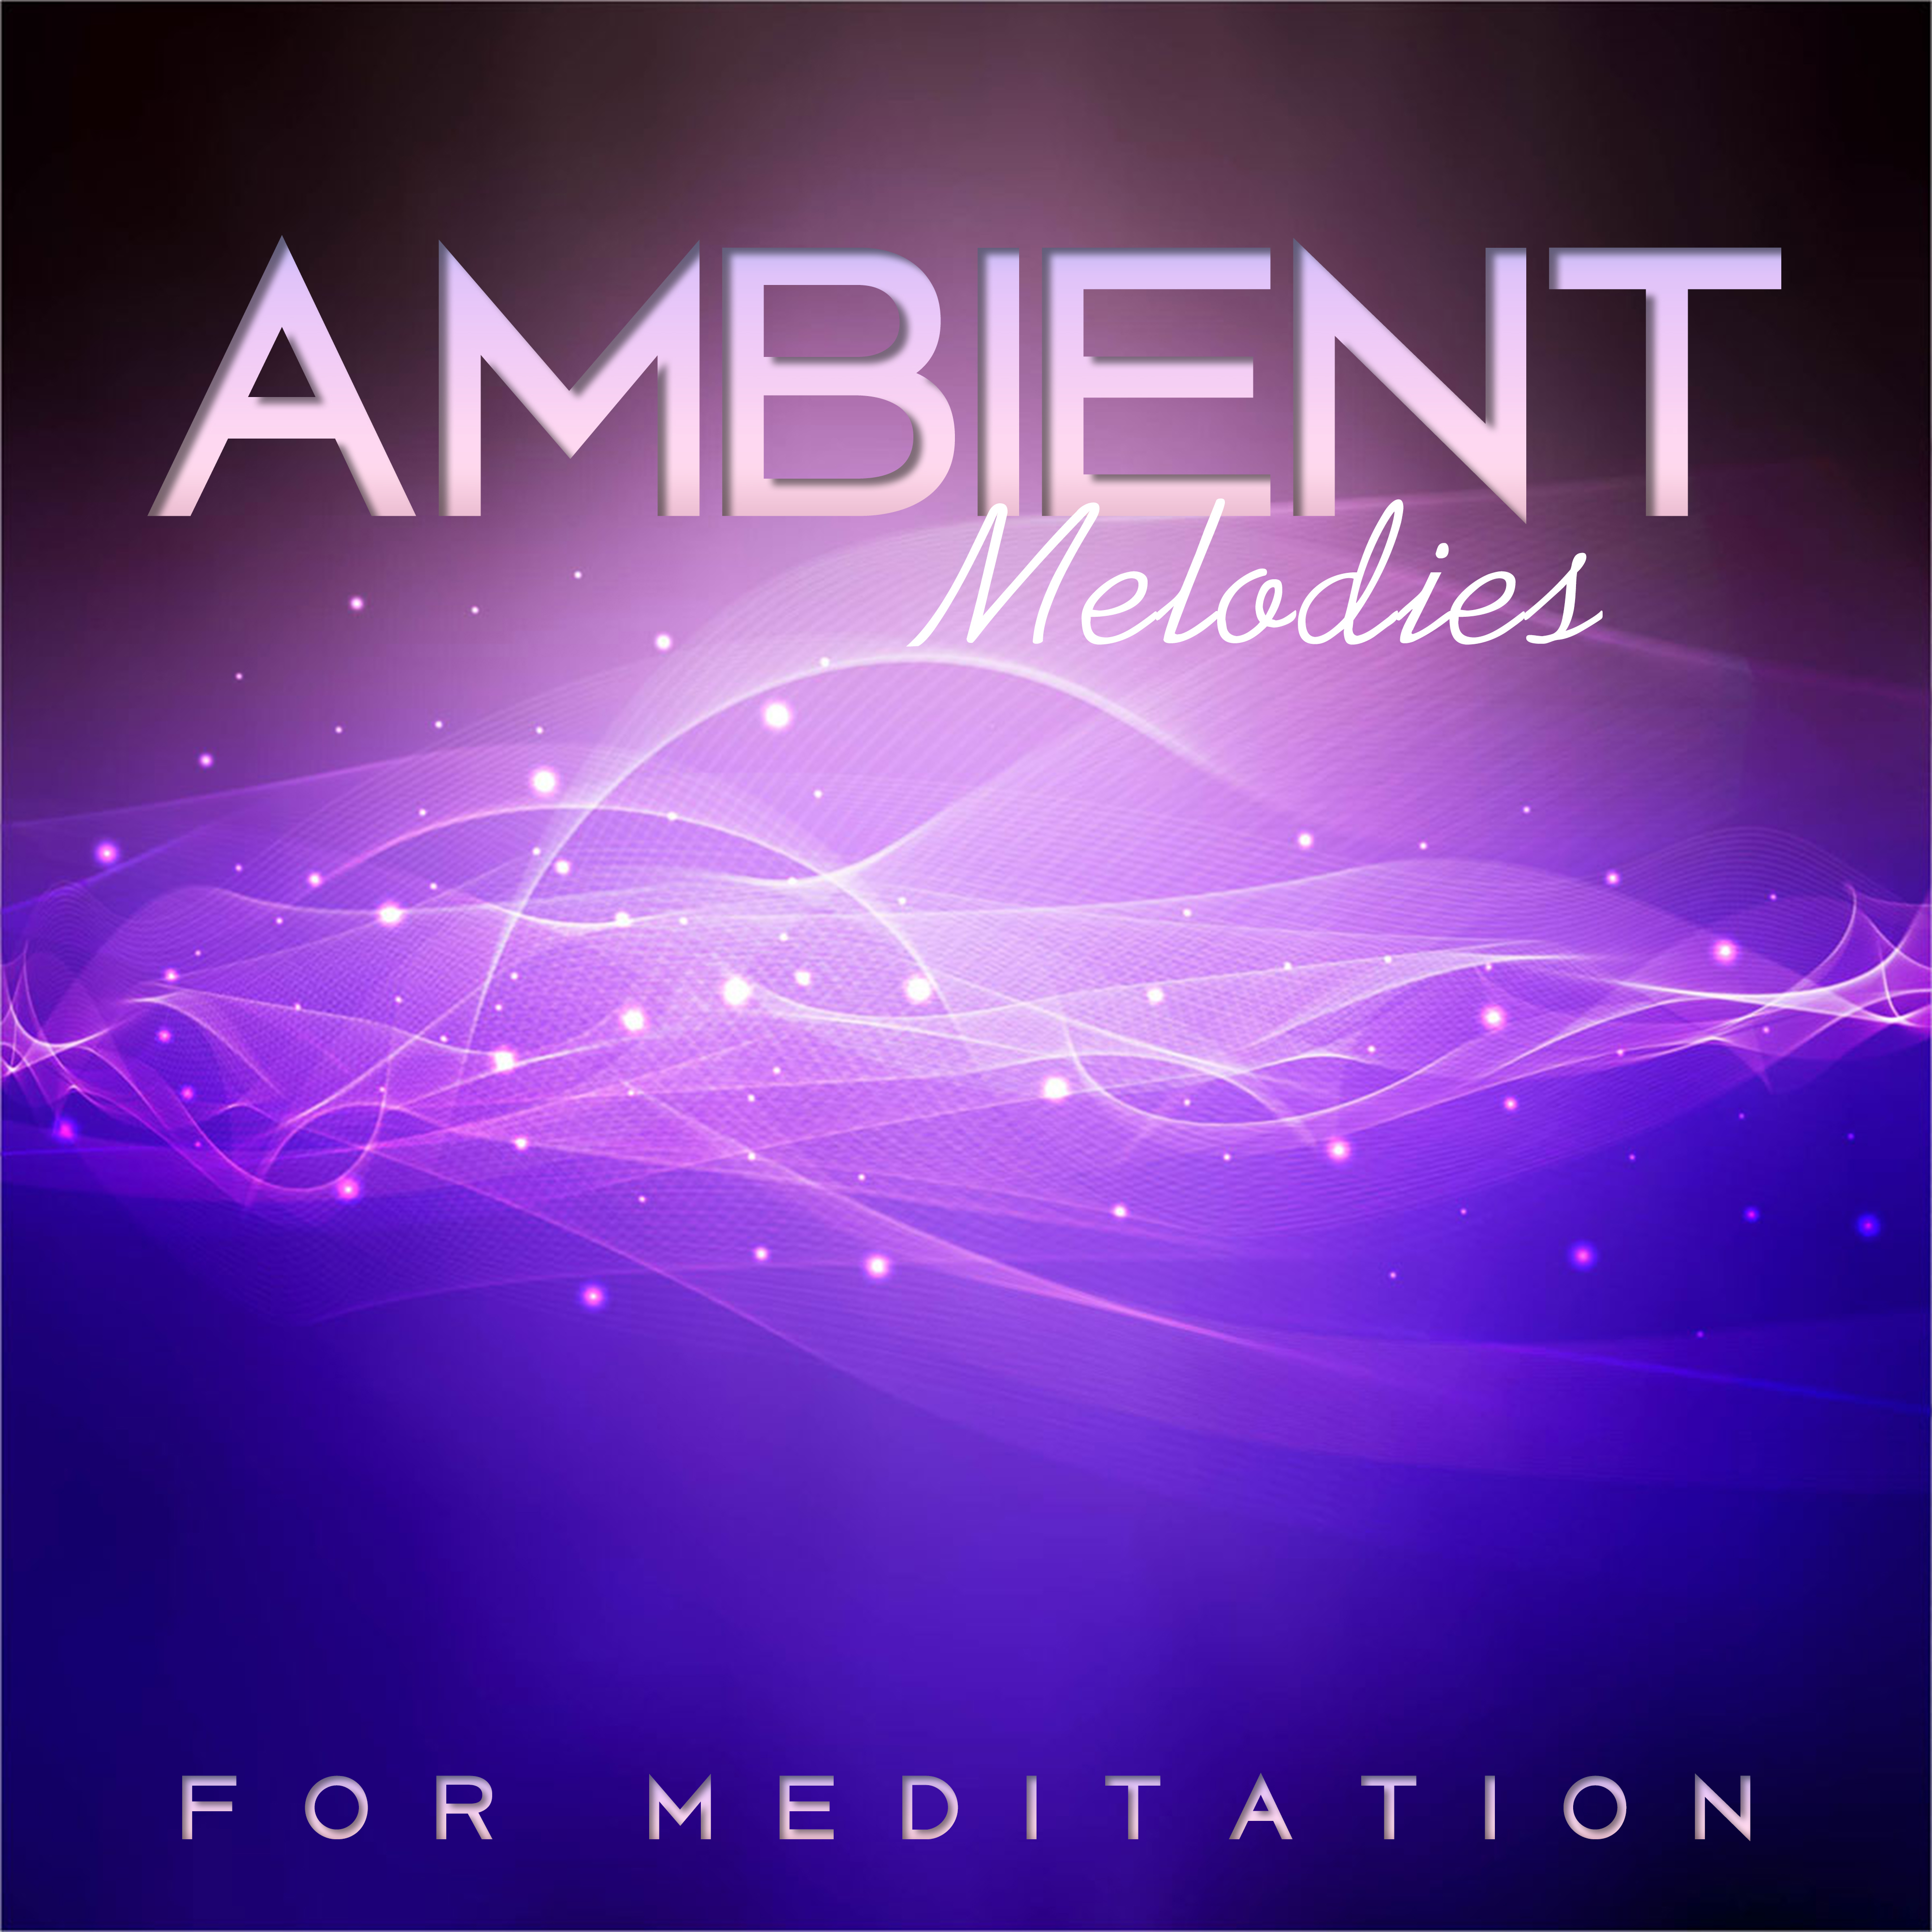 Ambient Melodies for Meditation